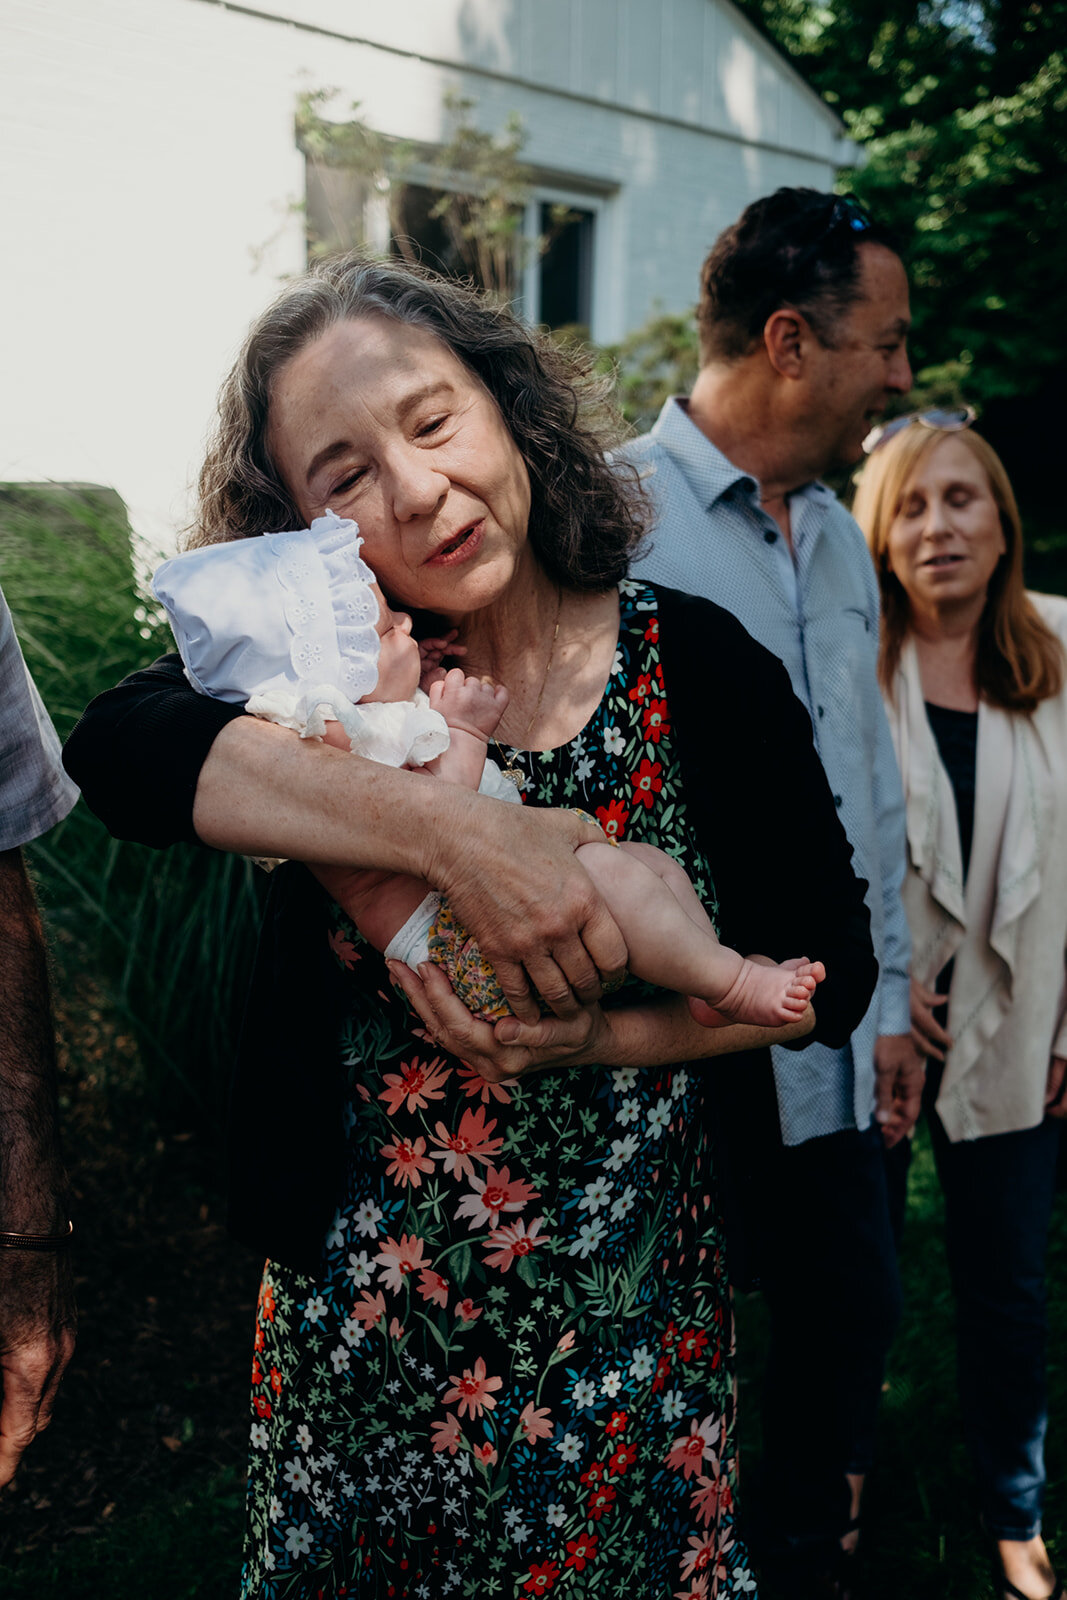 A grandmother snuggles her granddaughter during a Jewish baby naming ceremony.